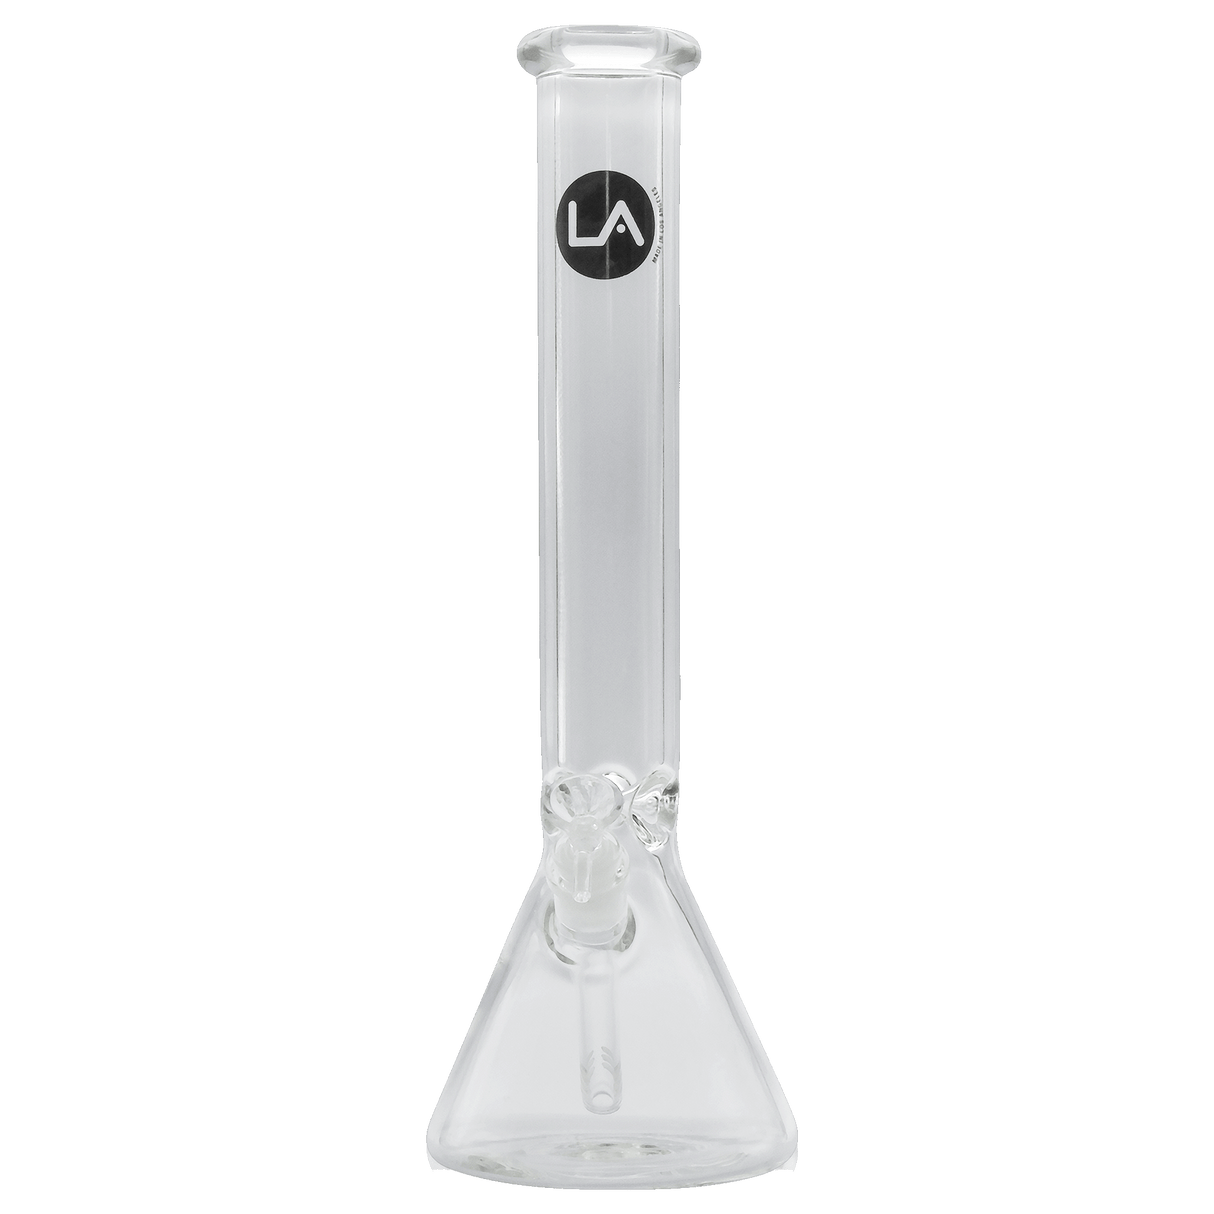 LA Pipes "Thicc Boy" 9mm Thick Beaker Bong, 16" Height, 50mm Diameter, Front View